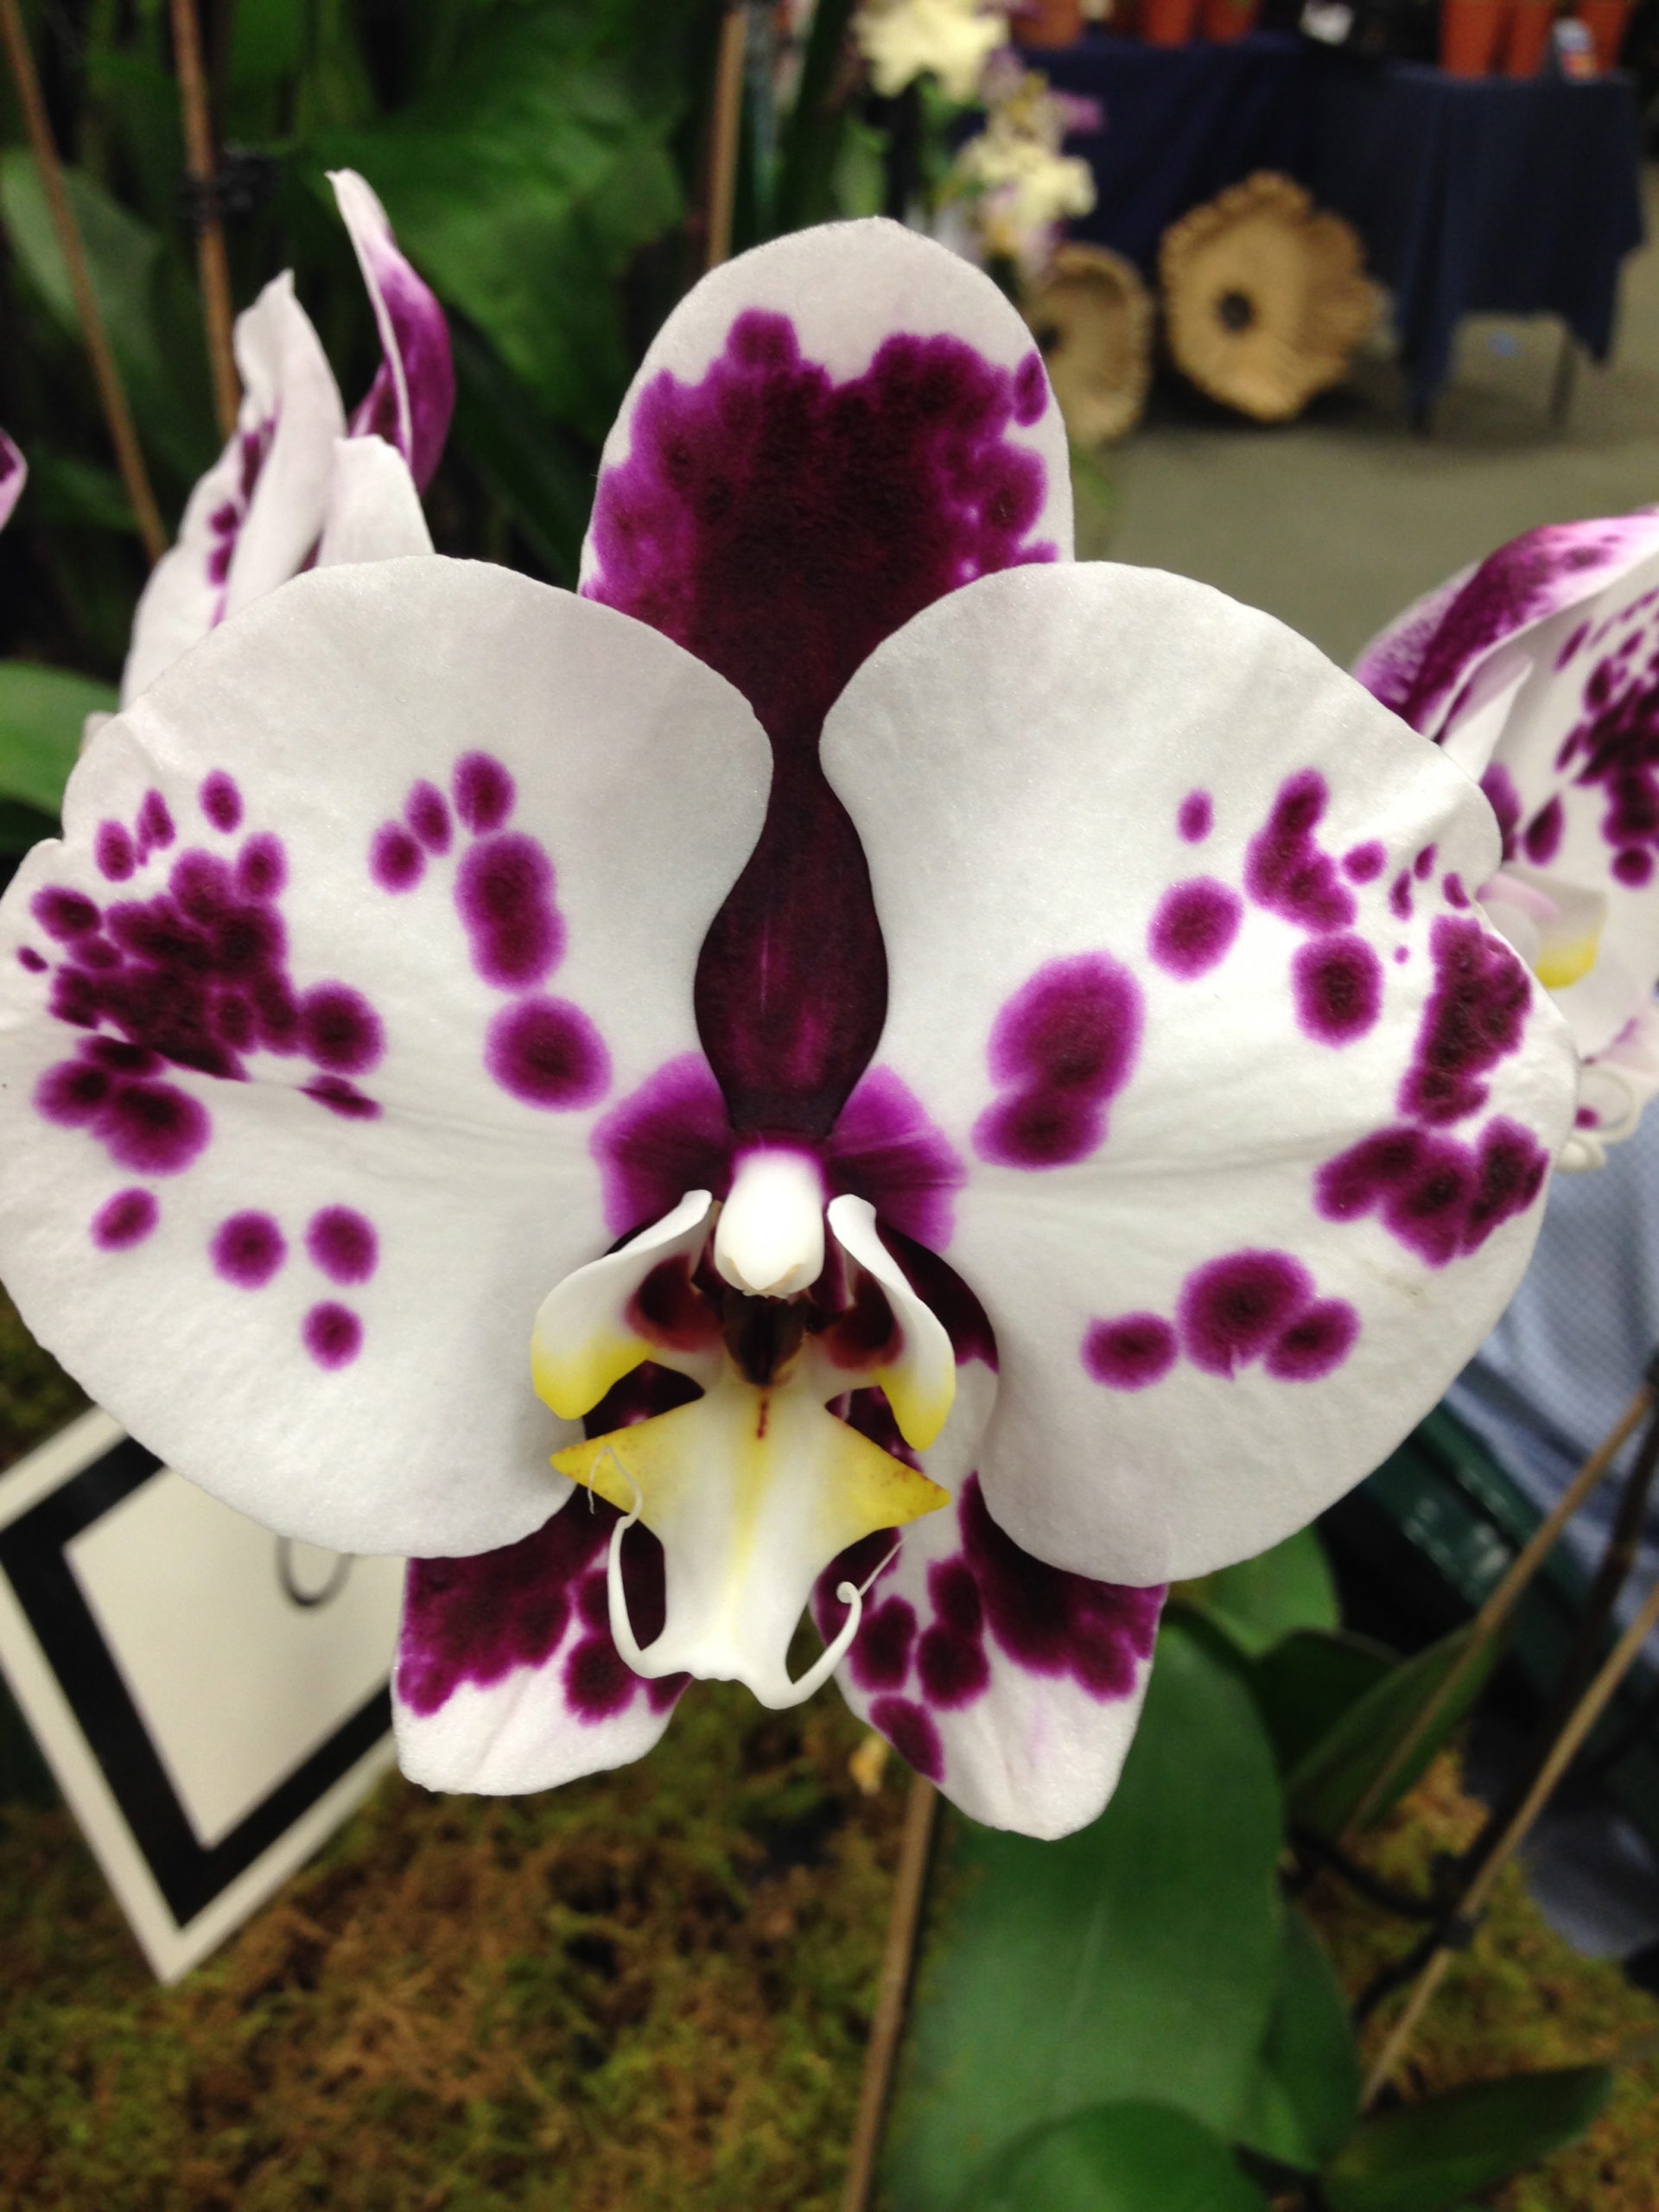 67th South Florida Orchid Society Expo – Fotos II